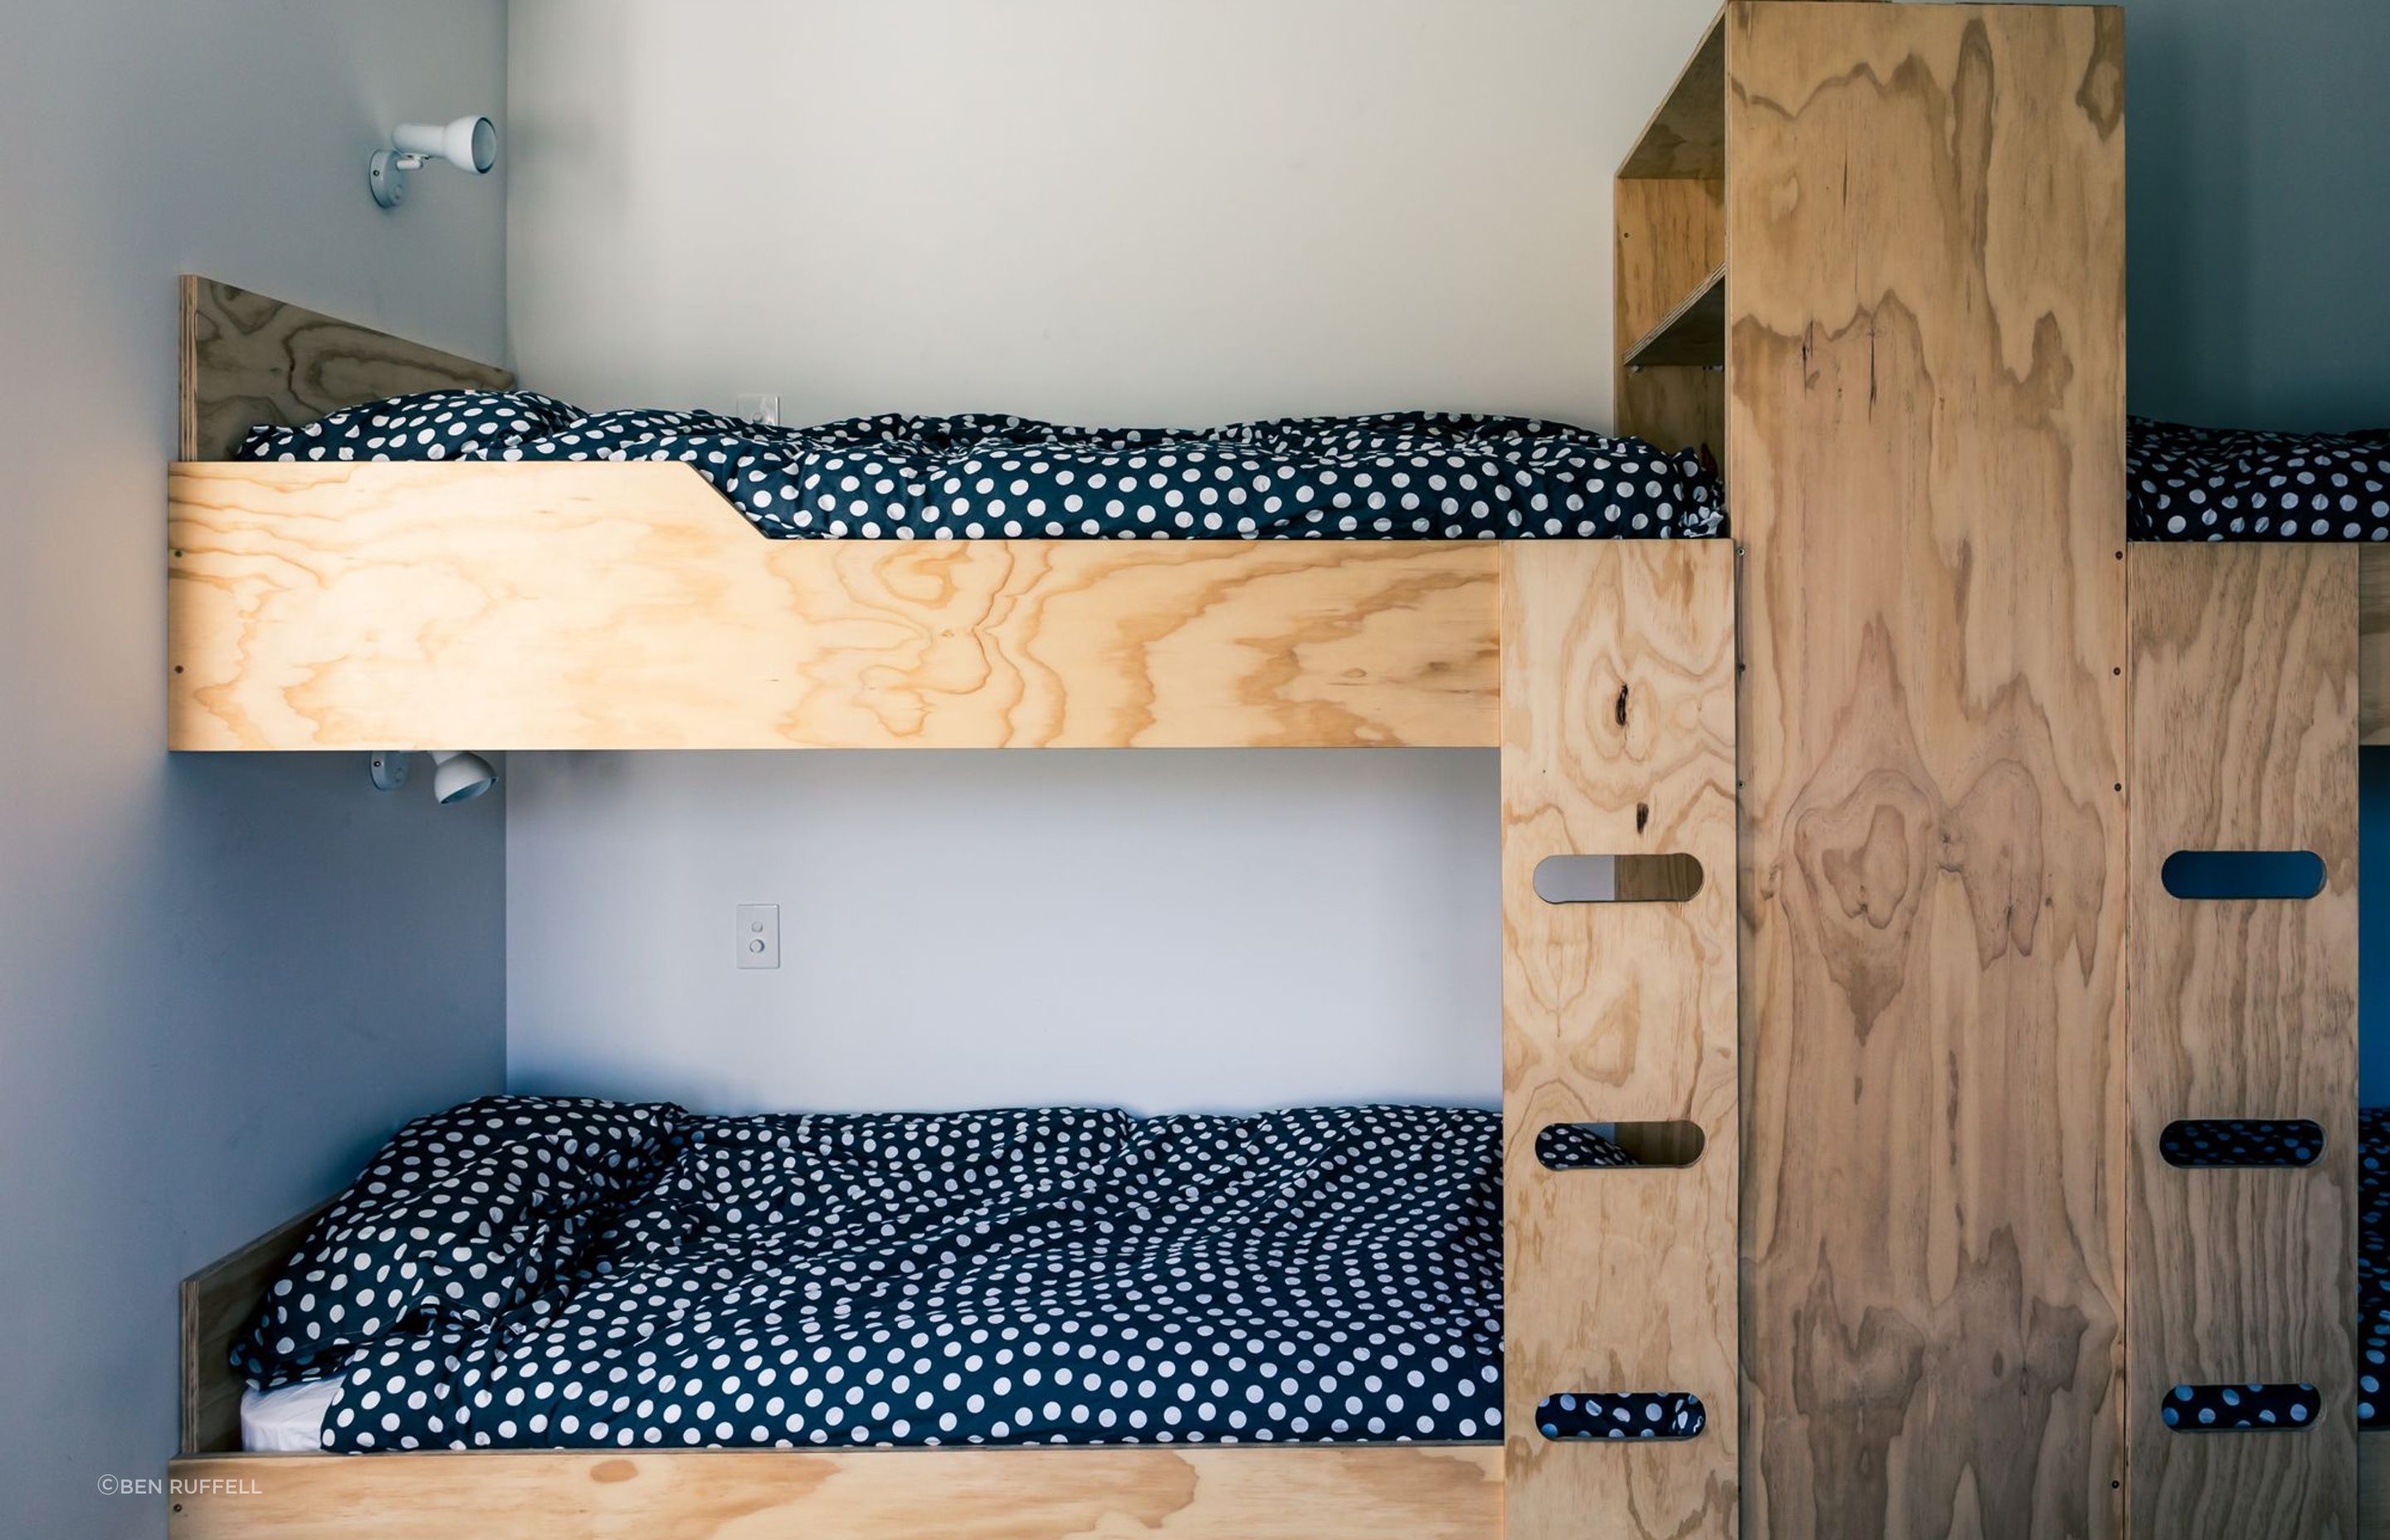 The children's bedroom includes two sets of bunk beds—designed by the architect—ideal for when overseas visitors come to stay.